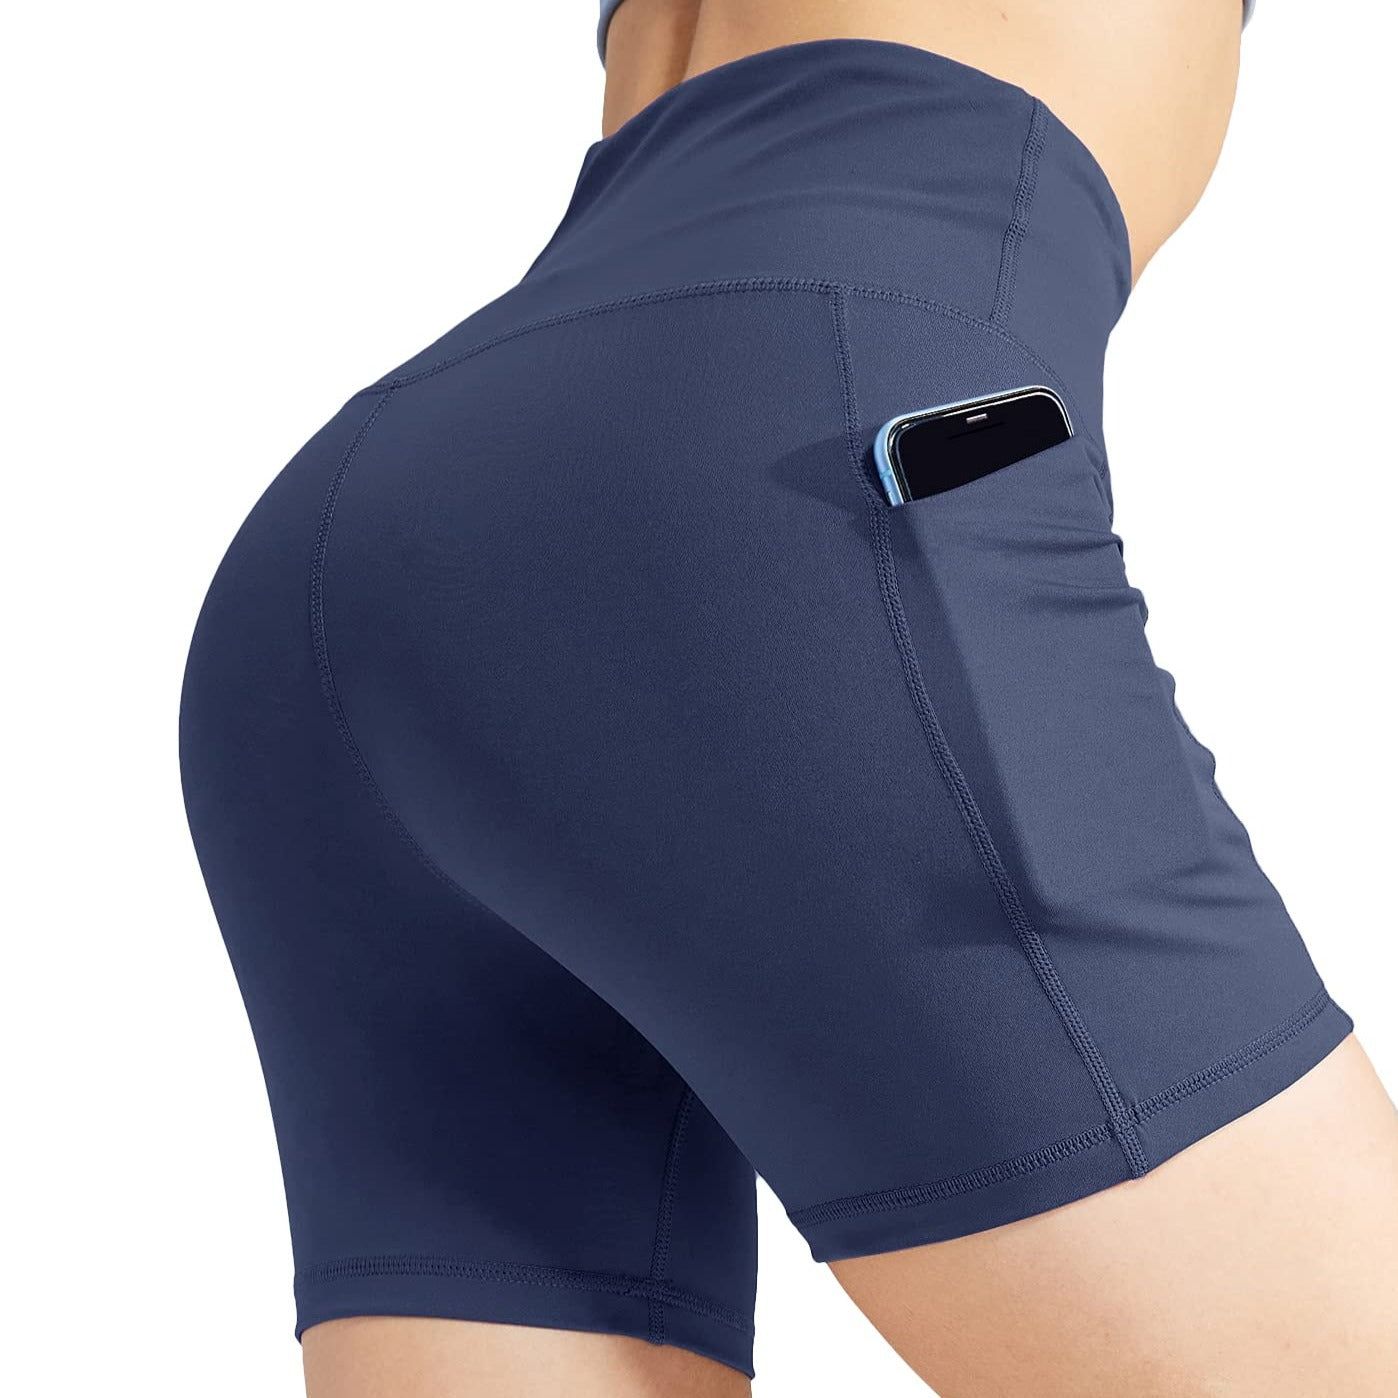 High Waist Yoga Tummy Control Shorts, 5Inch/8 Inch Bottoms Navy / X-Small / 5 inches MIER